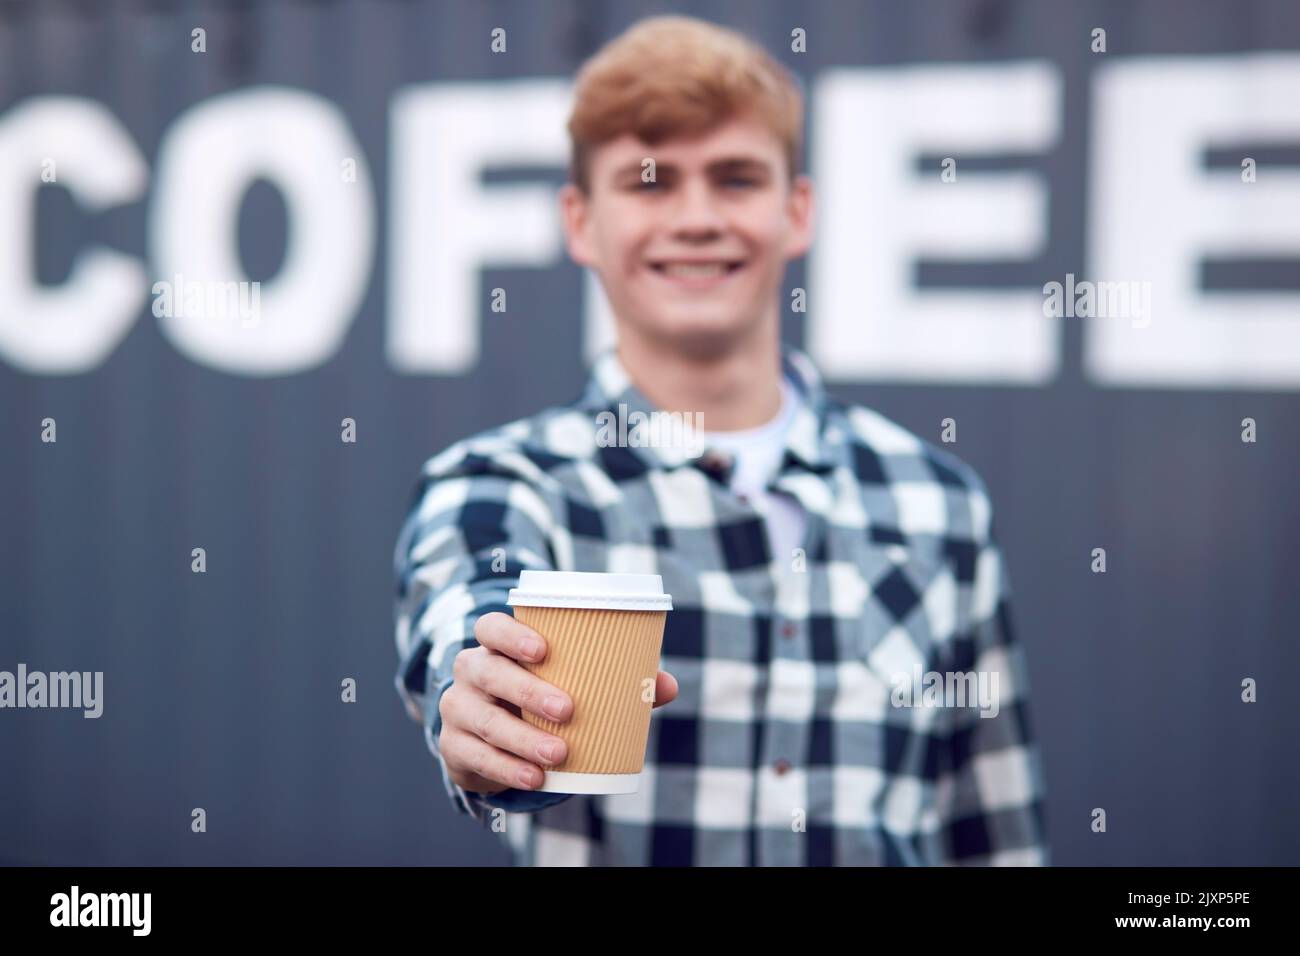 Male Worker Holding Takeaway Standing In Front Of Shipping Container Labelled Coffee Stock Photo